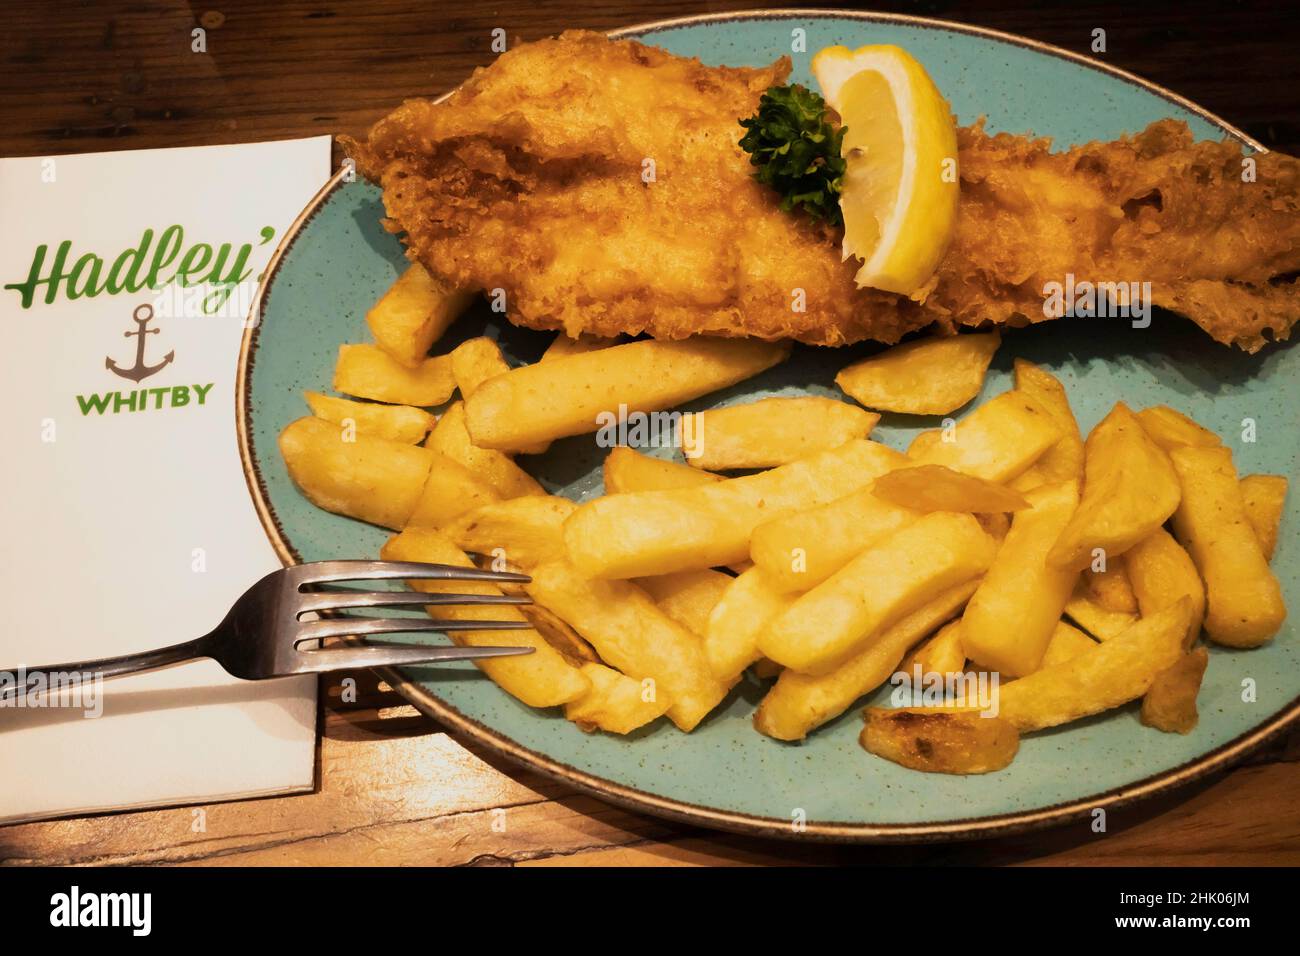 A Yorkshire Meal of Haddock and chips  at Hadleys Cafe in Whitby England Stock Photo